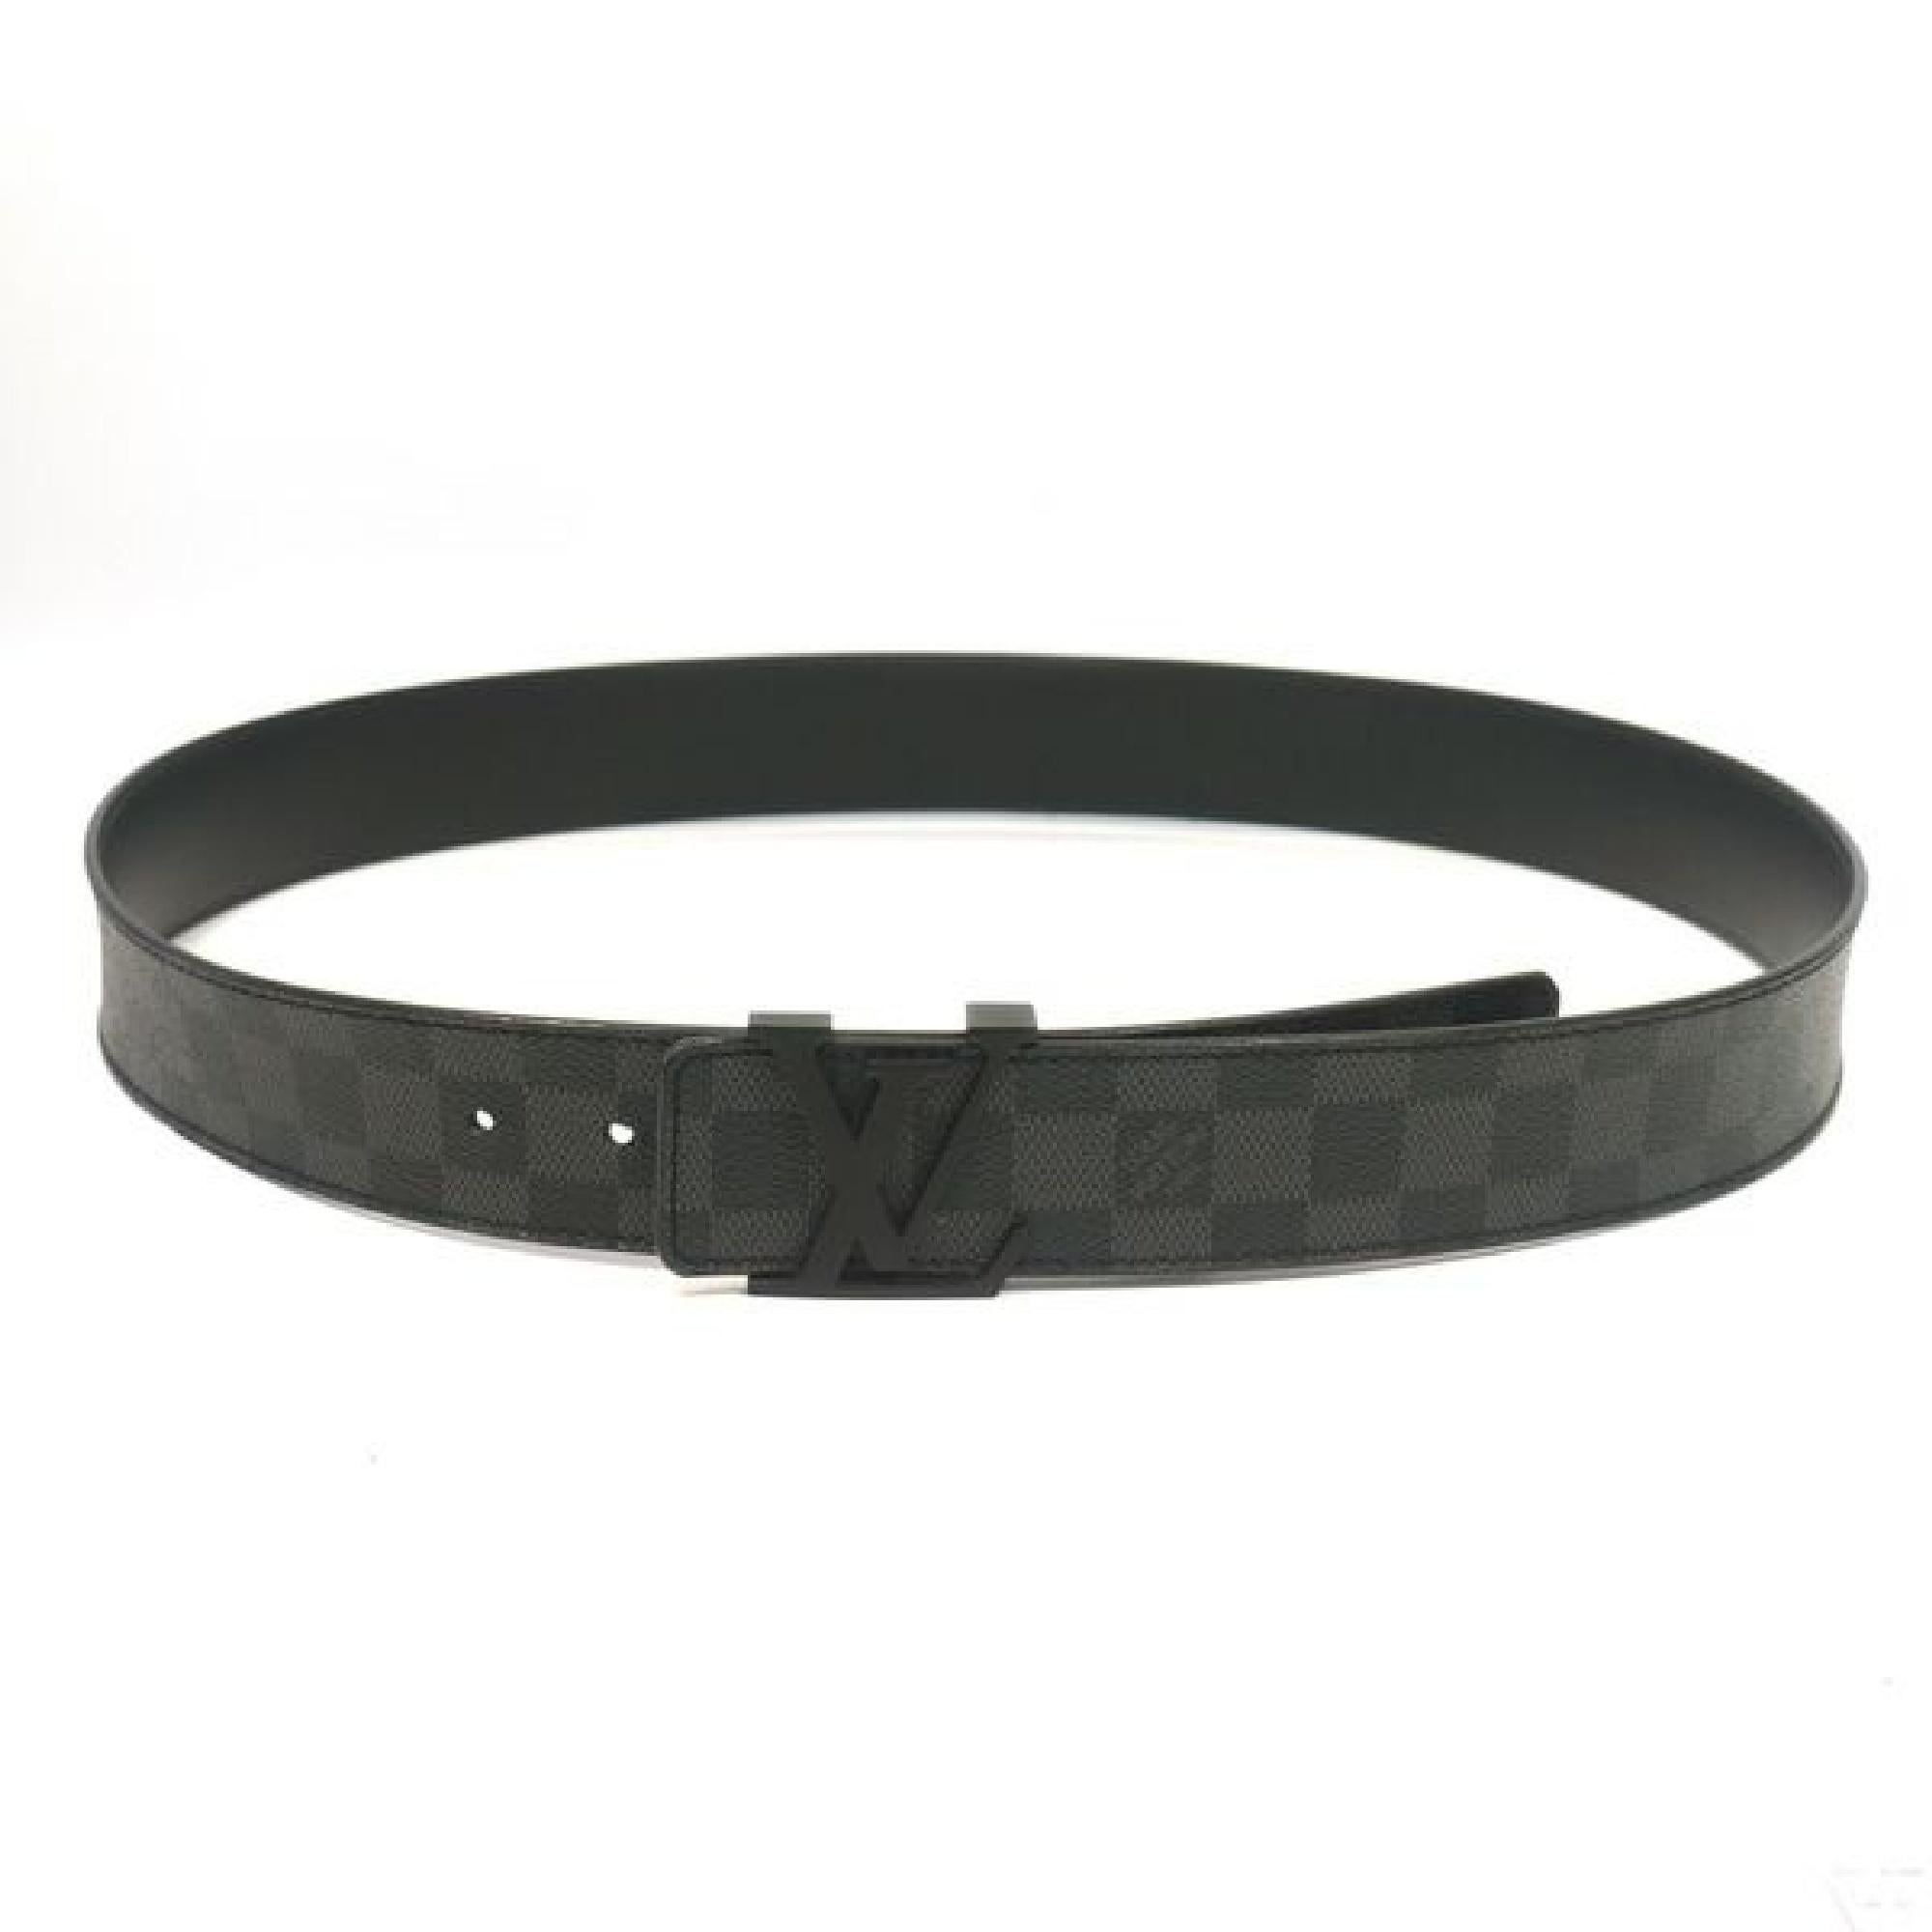 An authentic LOUIS VUITTON Ceinture Initiales Mens belt M9808 The outside material is Damier graphite canvas. The pattern is Ceinture  Initiales. This item is Contemporary. The year of manufacture would be 2014.
Rank
A beauty goods
There is little